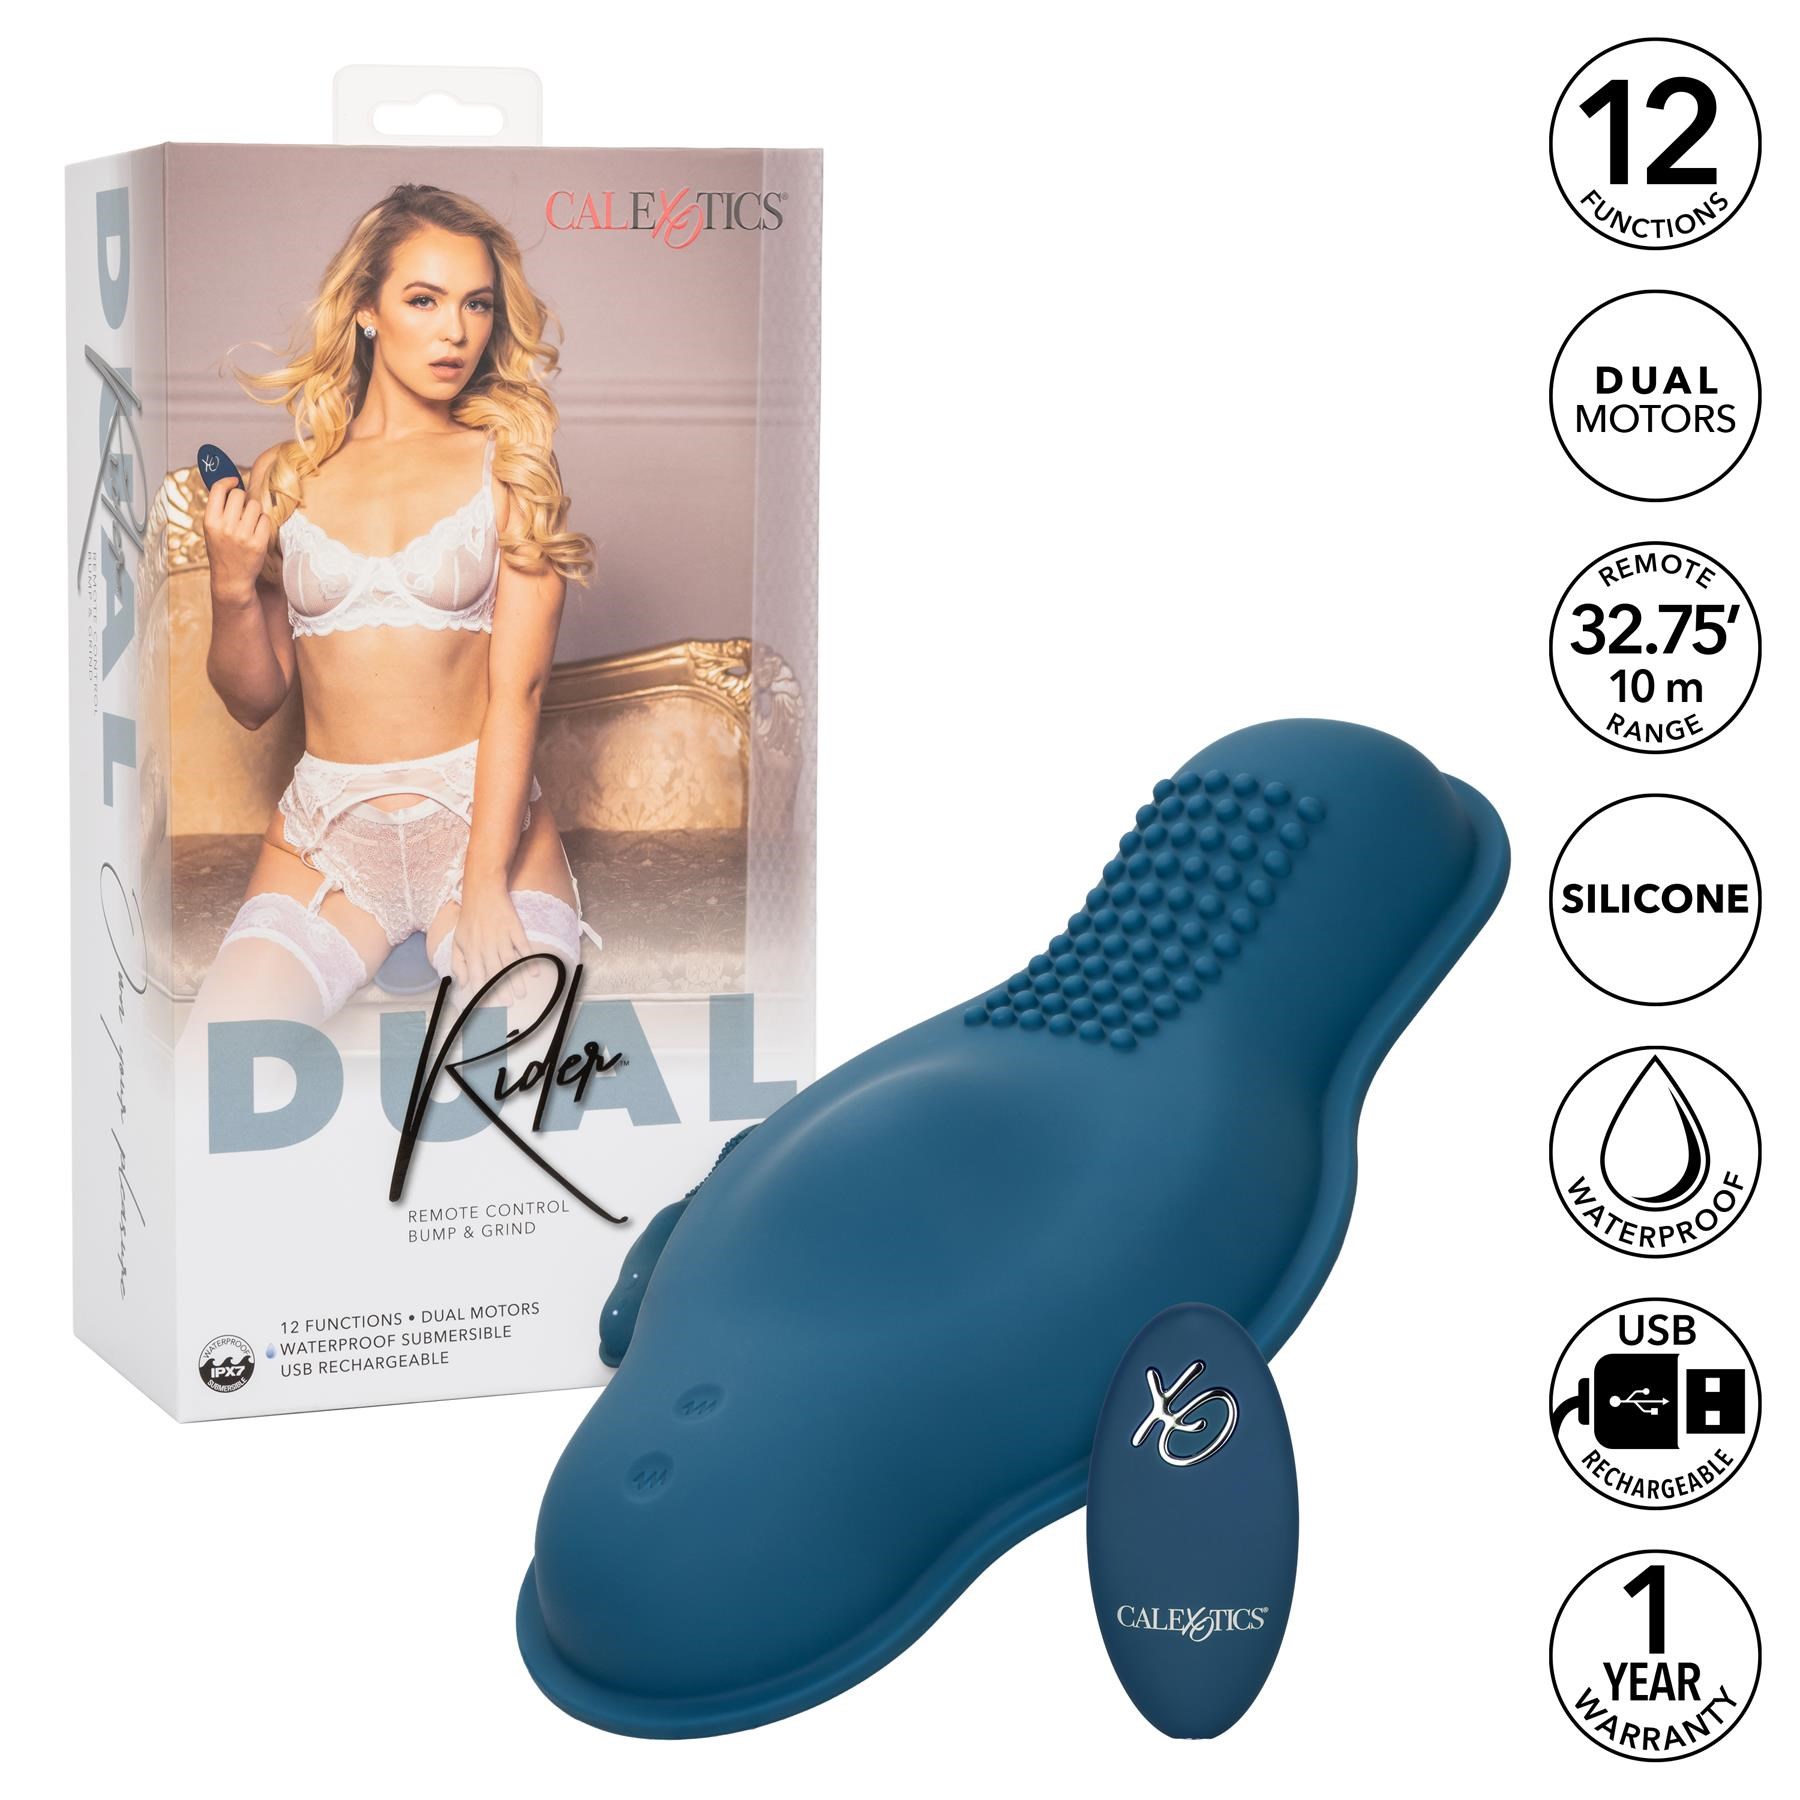 Dual Rider Bump And Grind Vibrator - Features